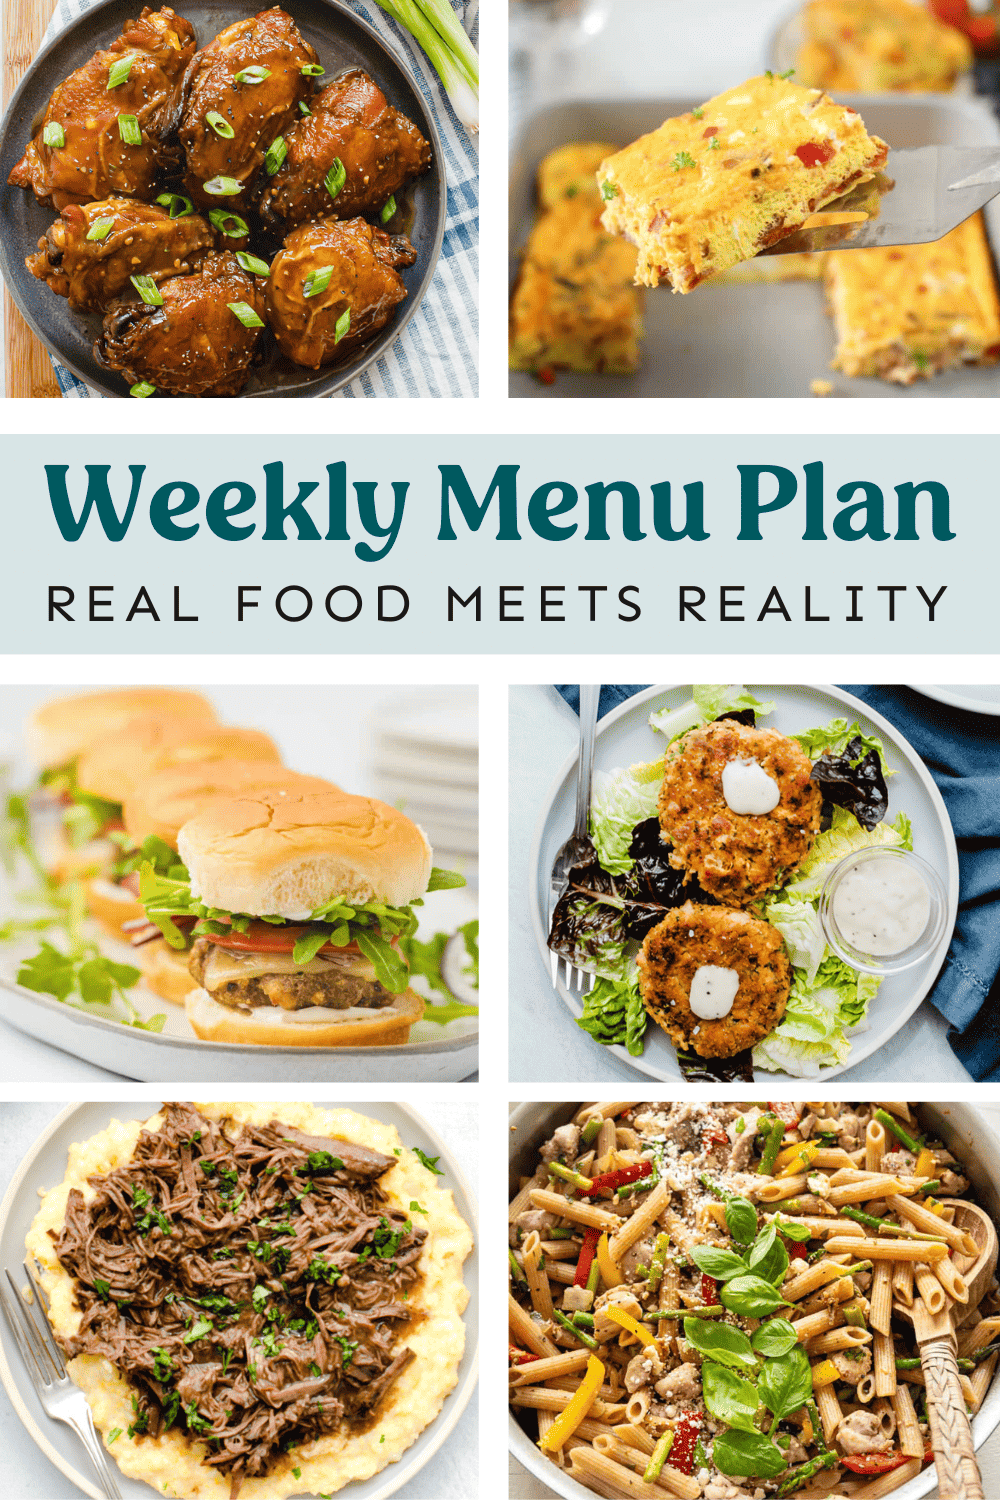 Collage of meals from the weekly menu plan.